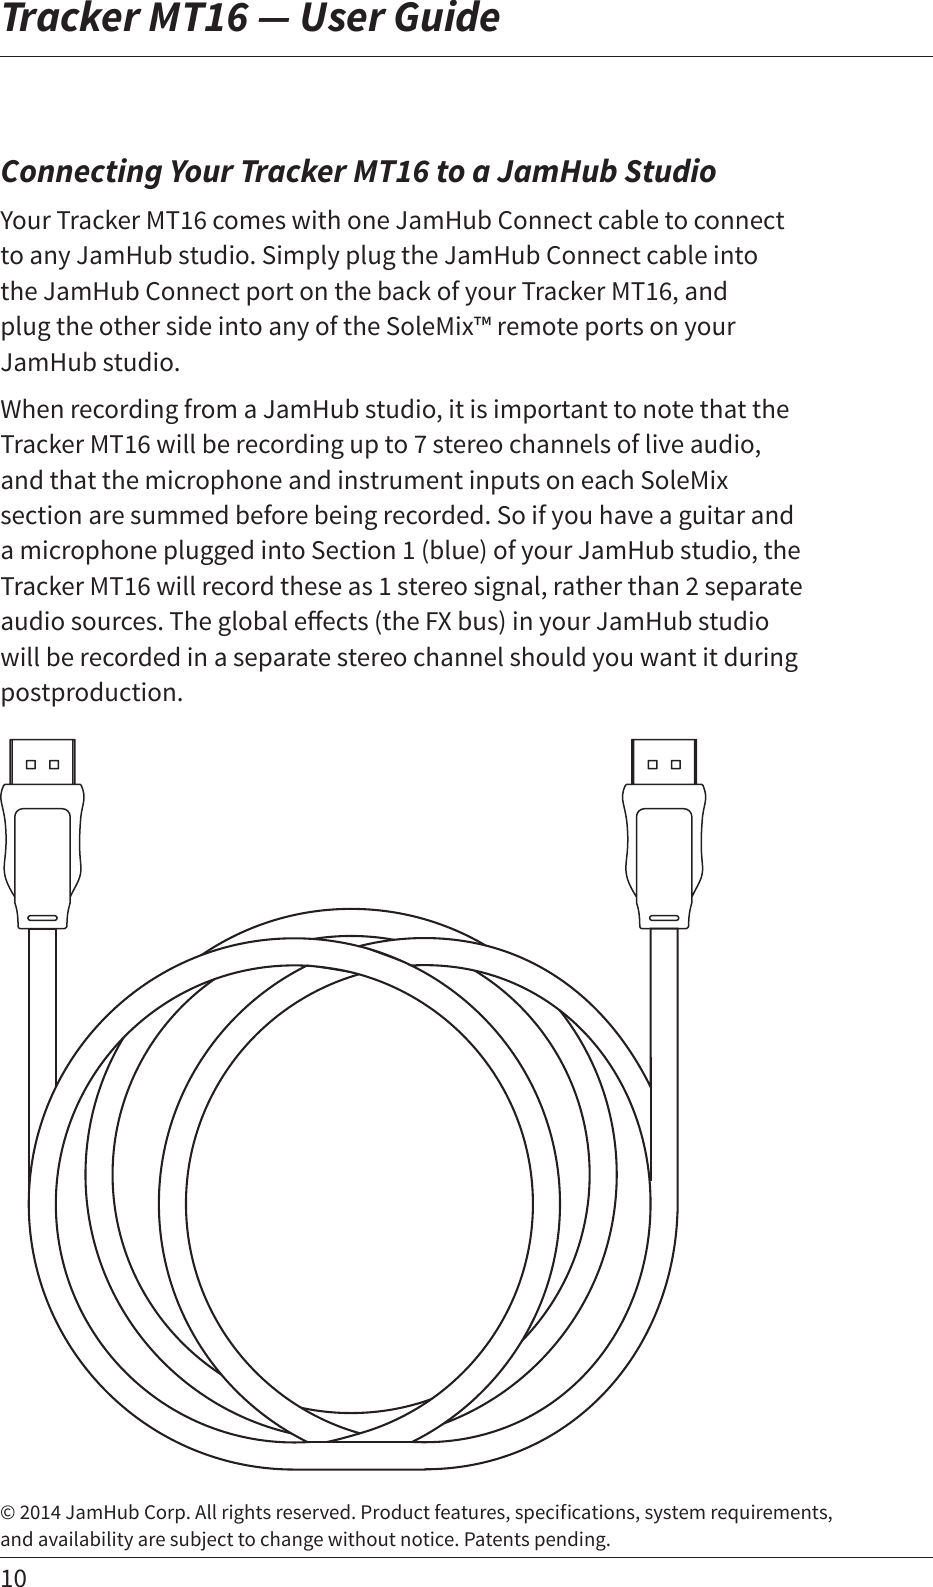 10Tracker MT16 — User Guide© 2014 JamHub Corp. All rights reserved. Product features, specications, system requirements,  and availability are subject to change without notice. Patents pending.Connecting Your Tracker MT16 to a JamHub StudioYour Tracker MT16 comes with one JamHub Connect cable to connect to any JamHub studio. Simply plug the JamHub Connect cable into  the JamHub Connect port on the back of your Tracker MT16, and  plug the other side into any of the SoleMix™ remote ports on your JamHub studio. When recording from a JamHub studio, it is important to note that the Tracker MT16 will be recording up to 7 stereo channels of live audio, and that the microphone and instrument inputs on each SoleMix section are summed before being recorded. So if you have a guitar and a microphone plugged into Section 1 (blue) of your JamHub studio, the Tracker MT16 will record these as 1 stereo signal, rather than 2 separate audiosources.Theglobaleects(theFXbus)inyourJamHubstudiowill be recorded in a separate stereo channel should you want it during postproduction.  